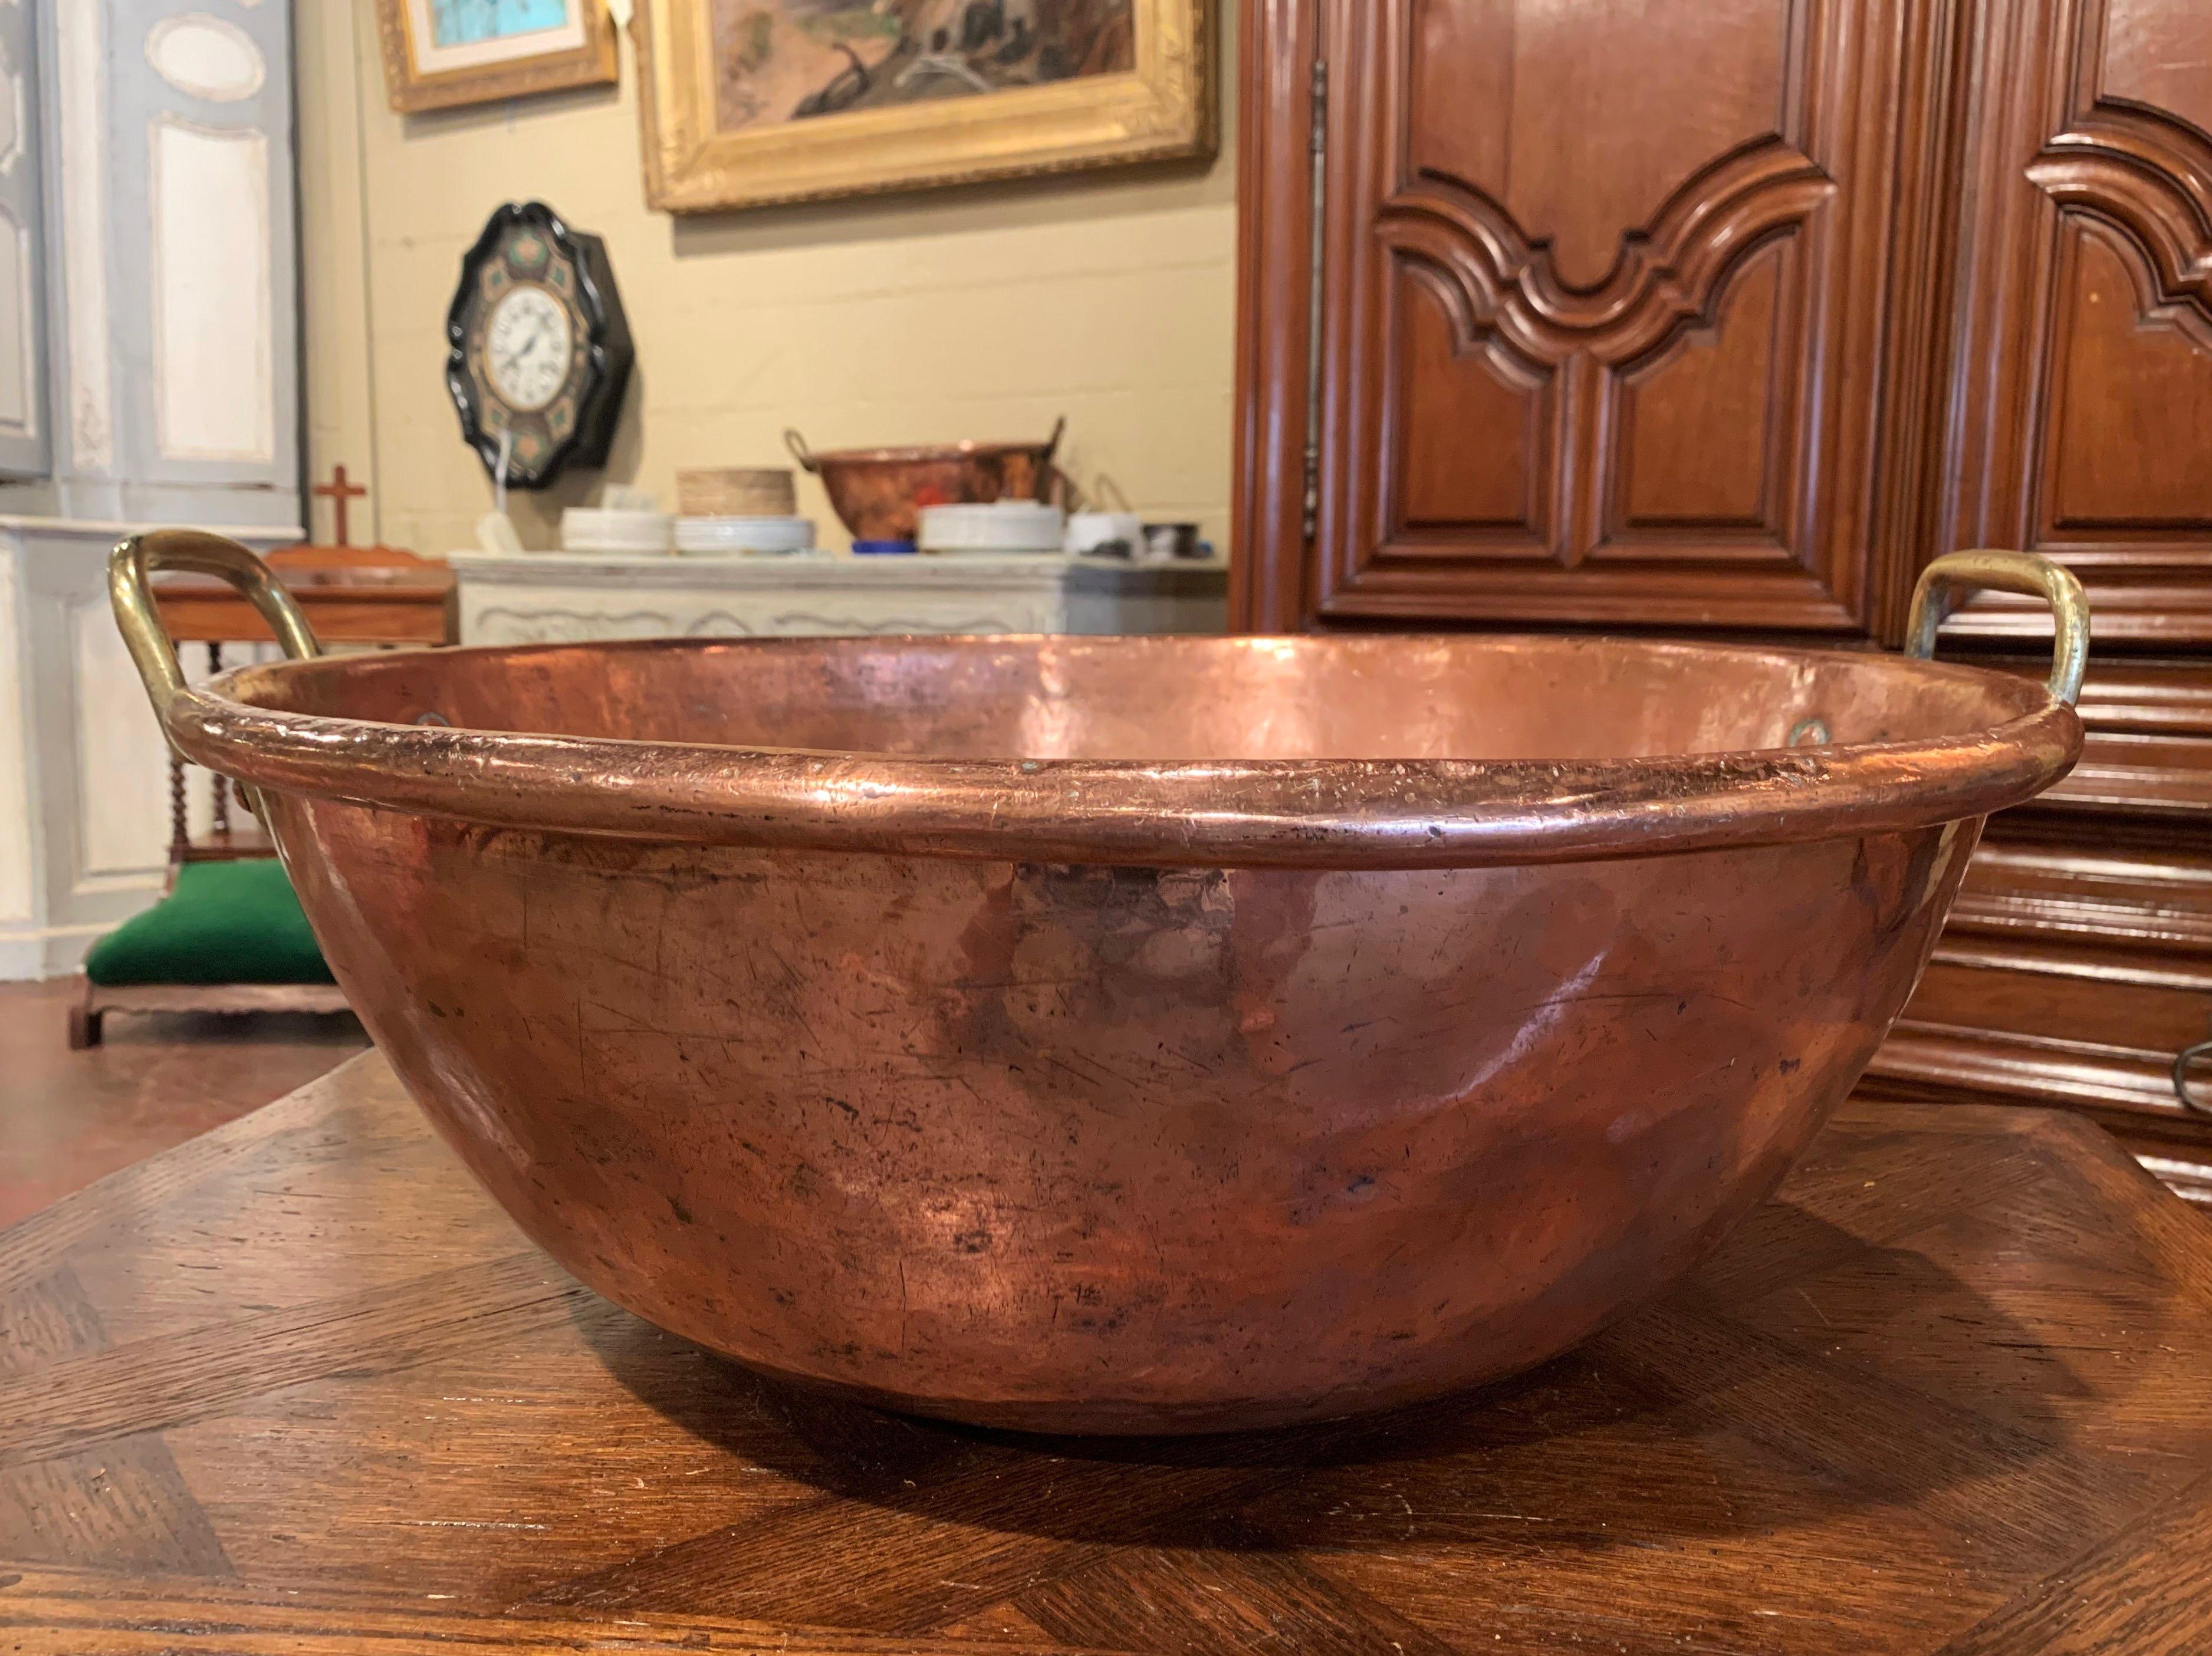 Hand-Crafted 19th Century French Copper over Brass Jelly Bowl from Normandy